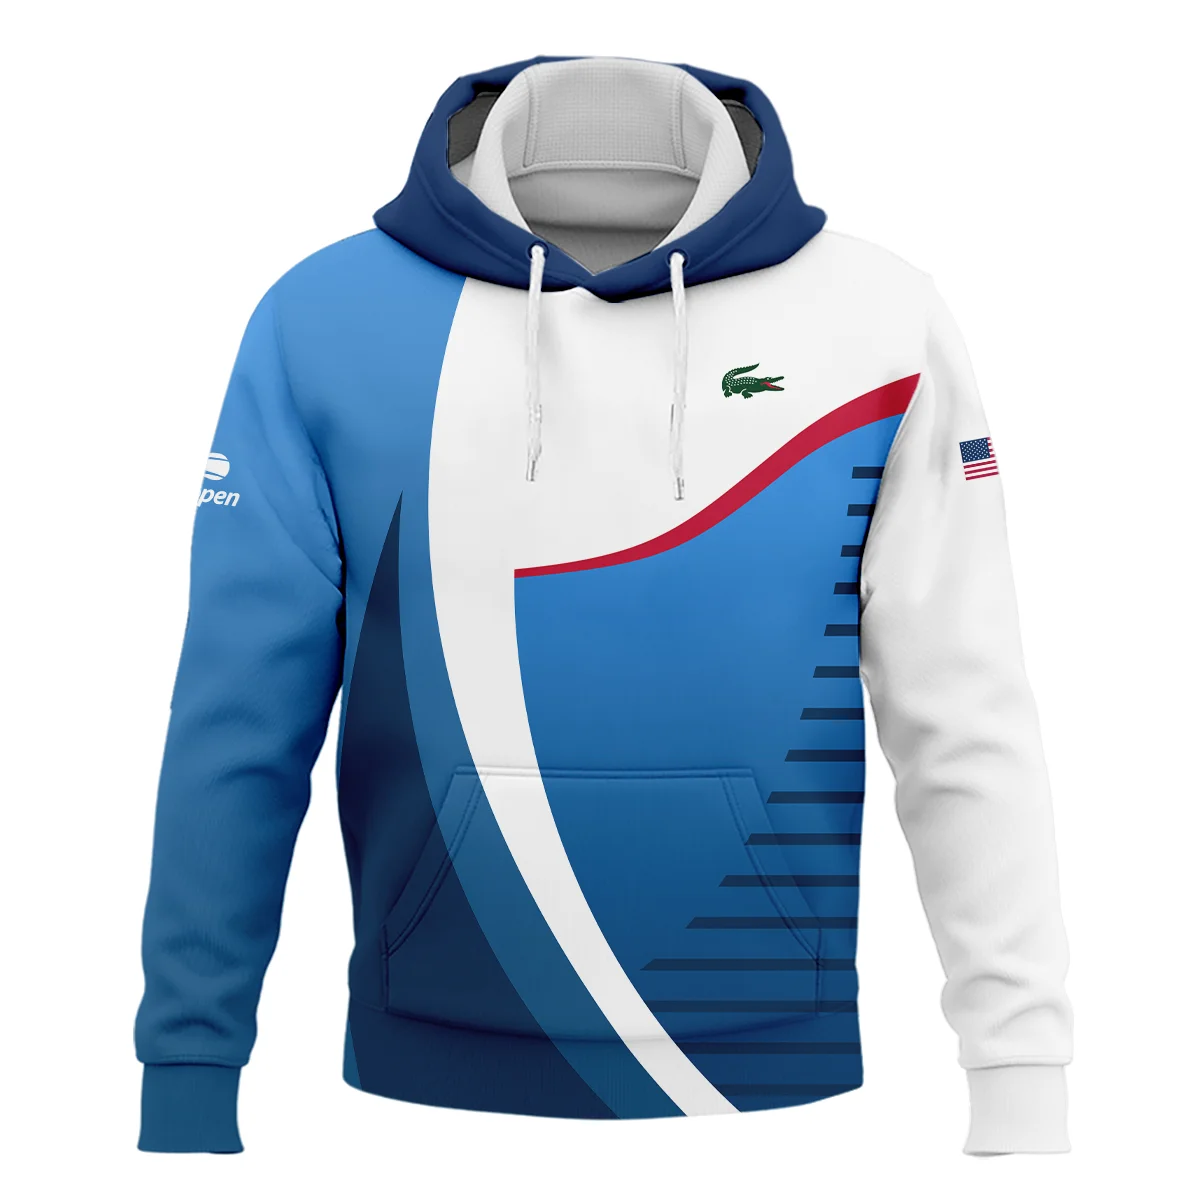 US Open Tennis Champions Lacoste Dark Blue Red White Hoodie Shirt Style Classic Hoodie Shirt